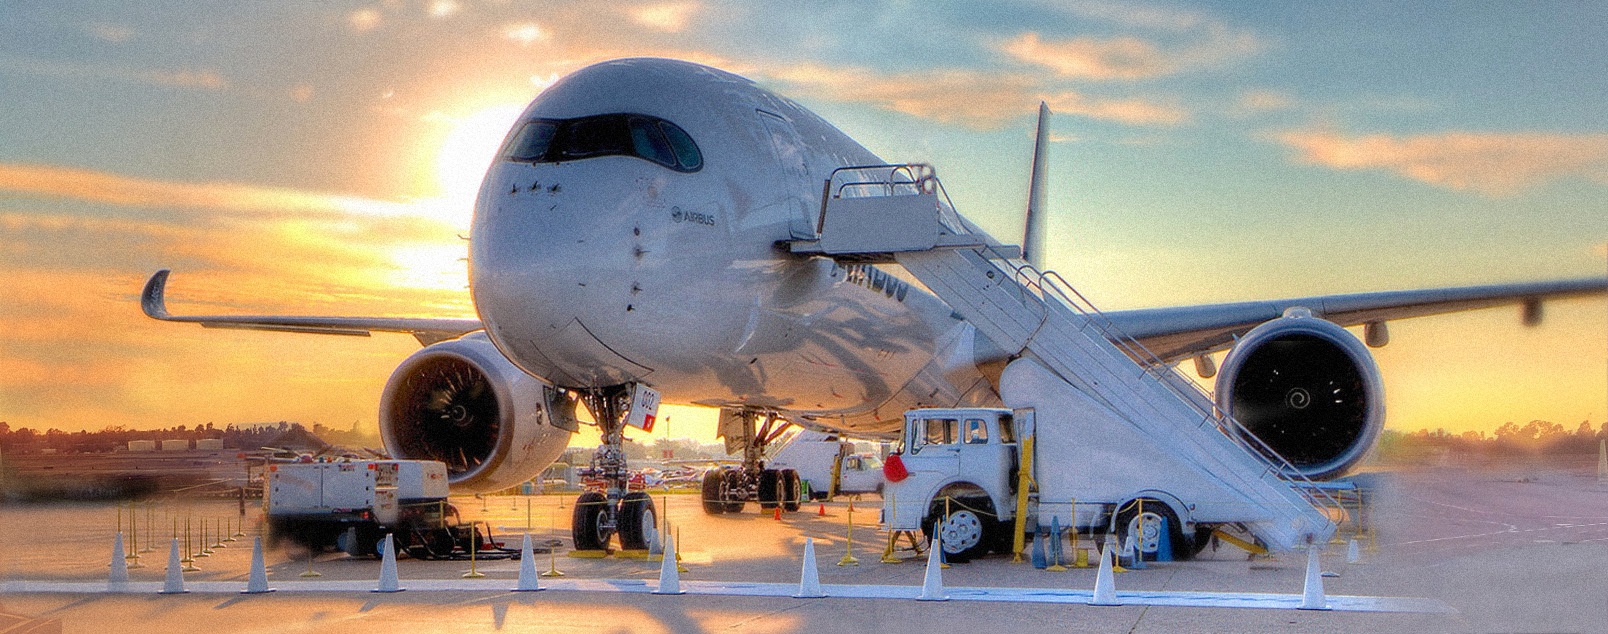 10 things you should know about the Airbus A350